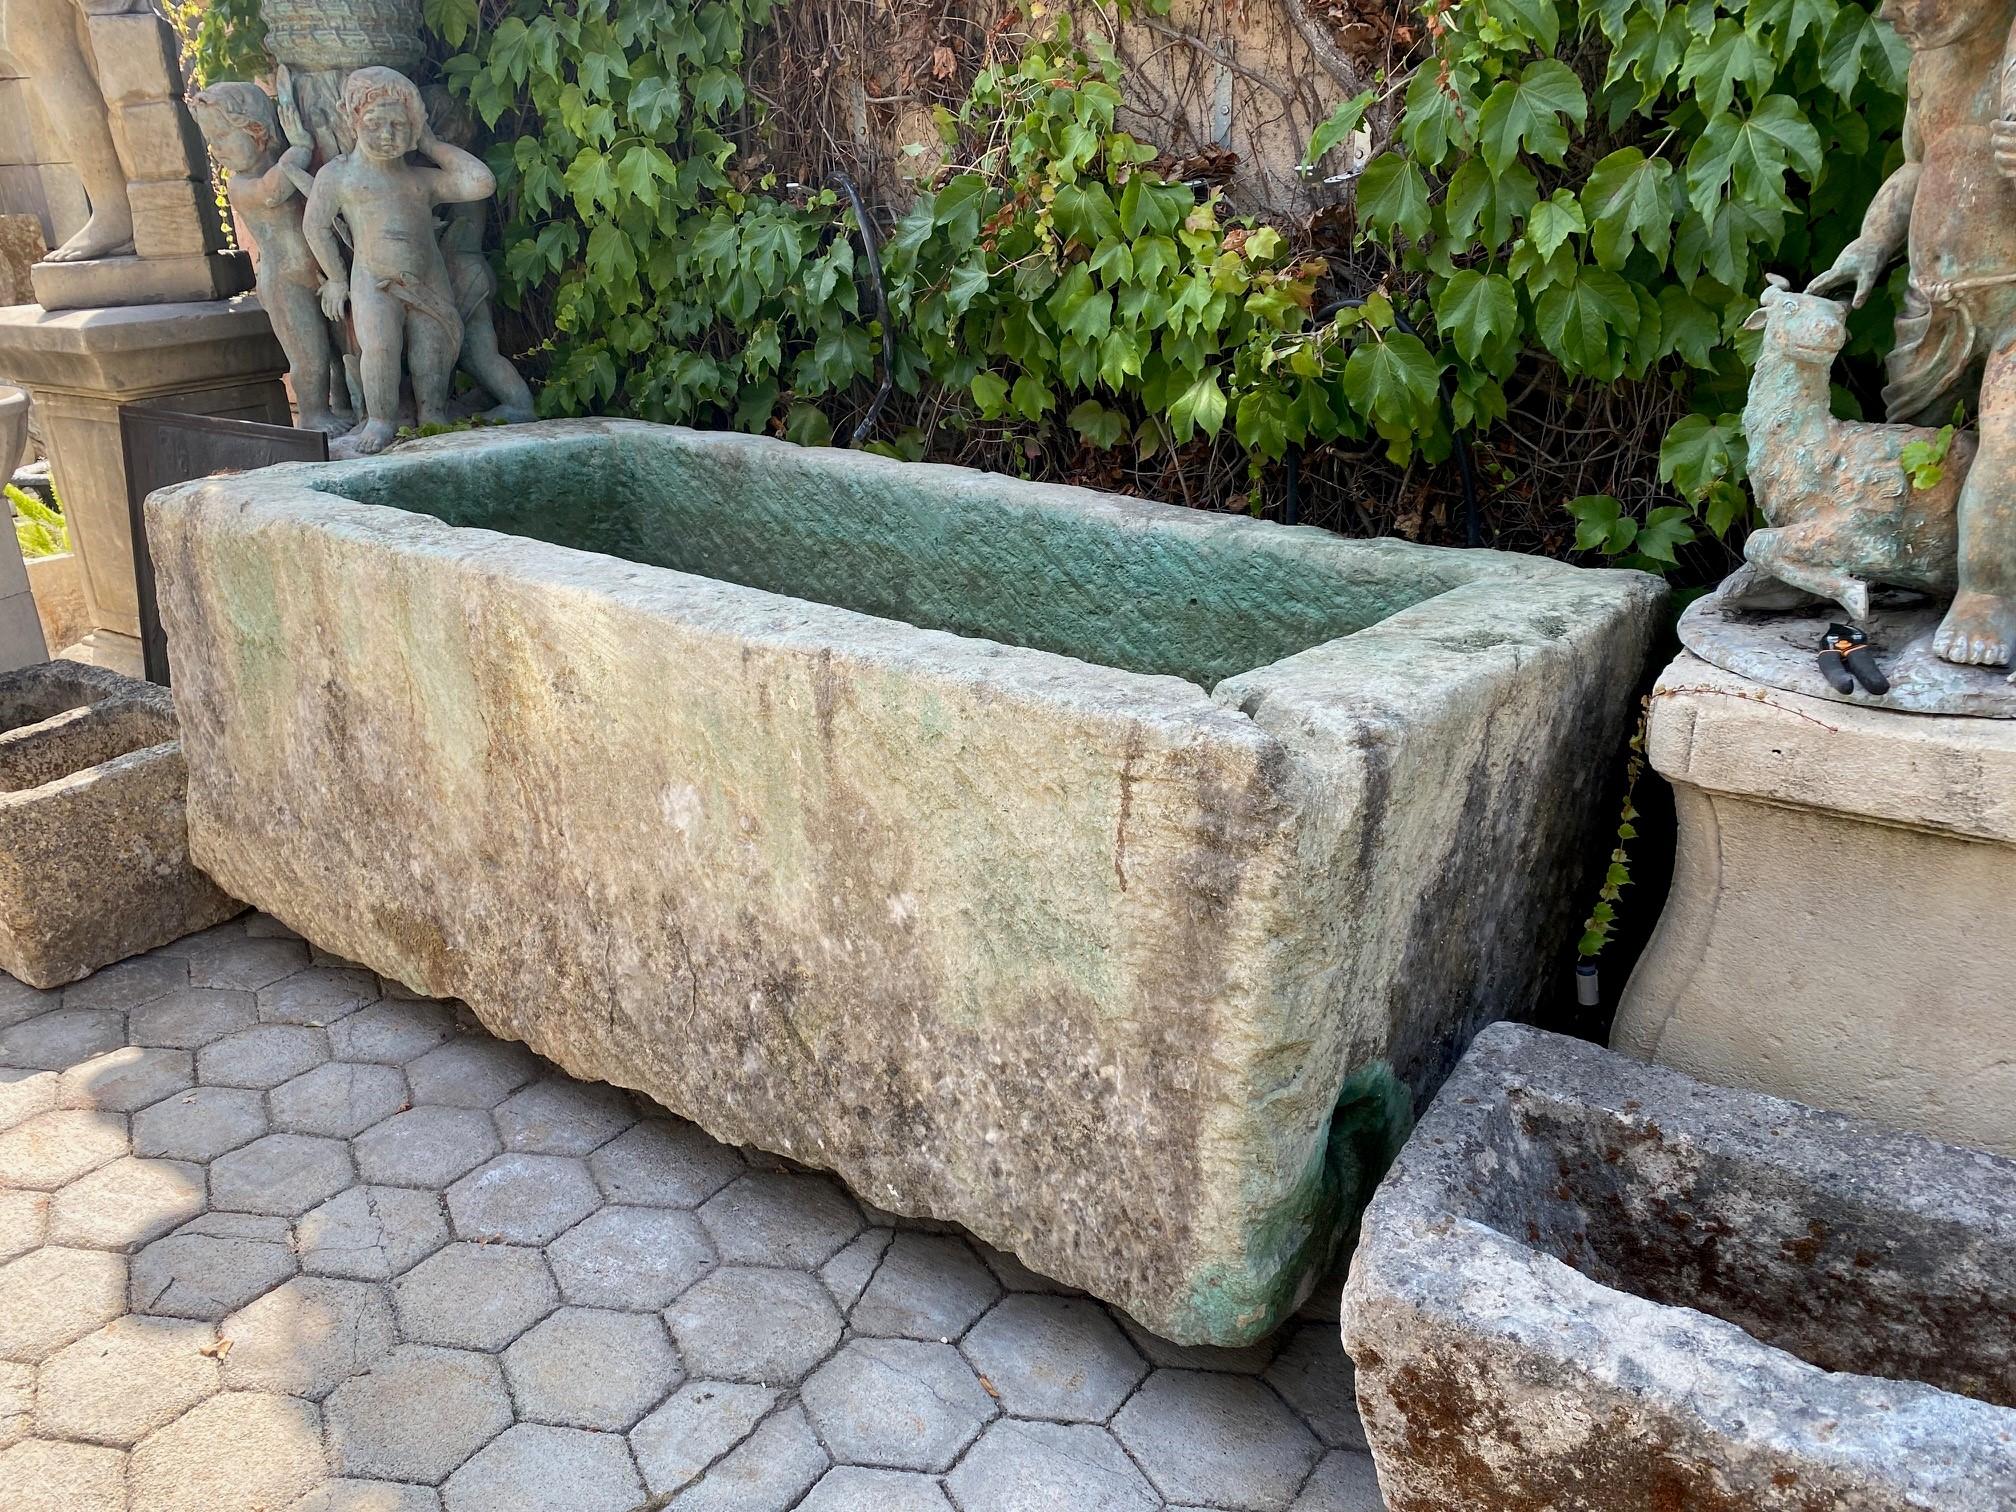 Hand Carved Stone Container Fountain Basin Tub Planter Firepit Trough Antique LA . Exquisite Very Large 18th century water fountain basin of hand carved stone . This trough could be installed with a simple bronze spout or a carved stone fountain